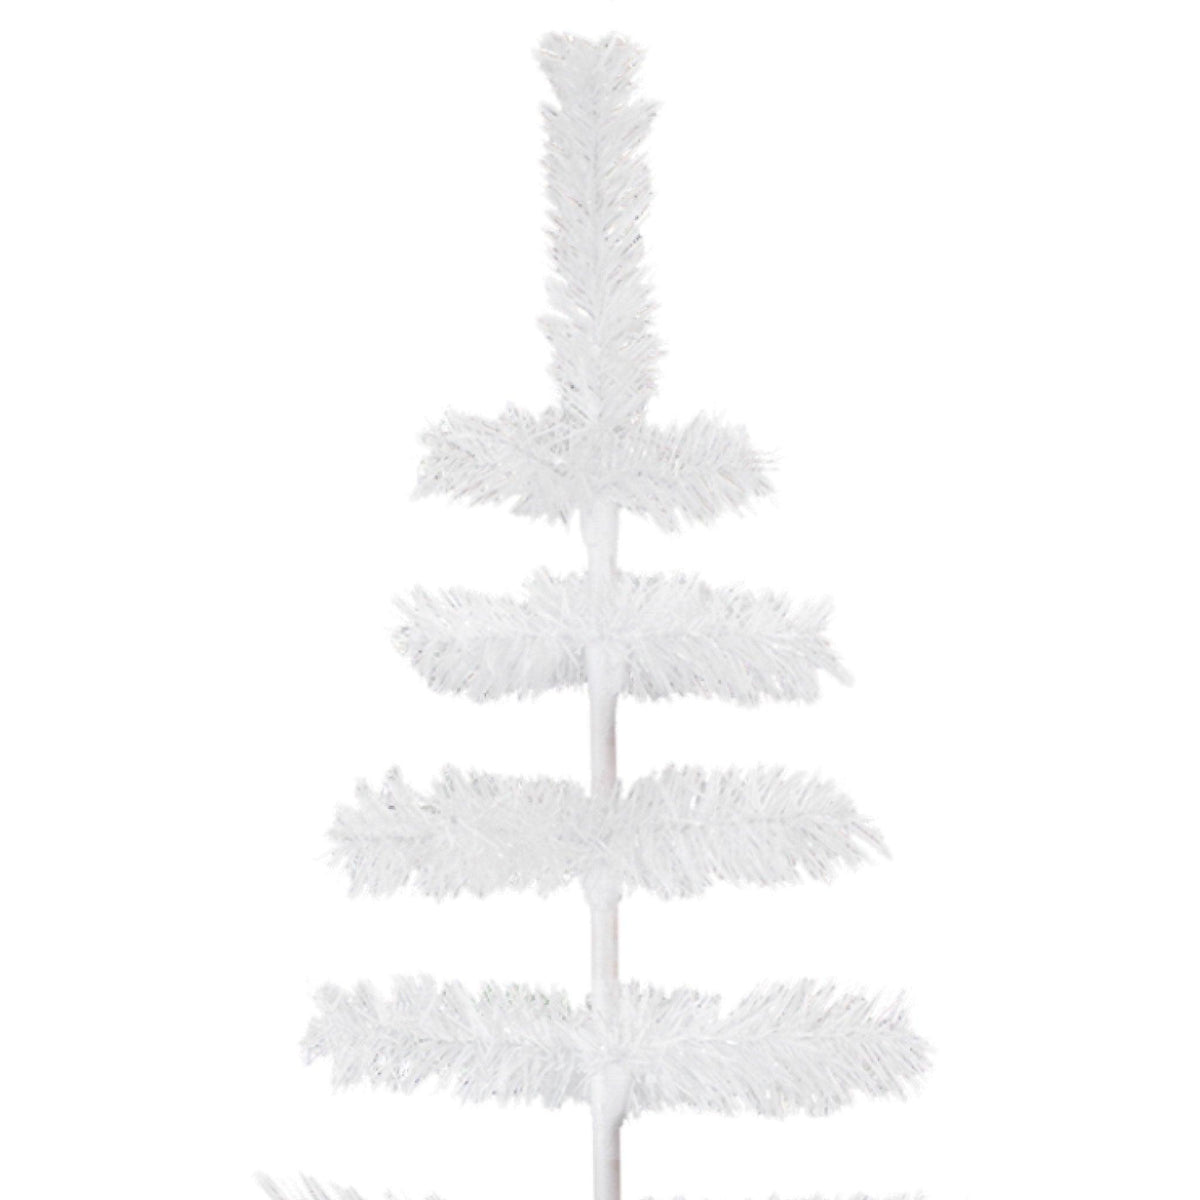 Top of the 5ft white tree.  Lee Display's 5ft White Tinsel Christmas Tree on sale now at leedisplay.com